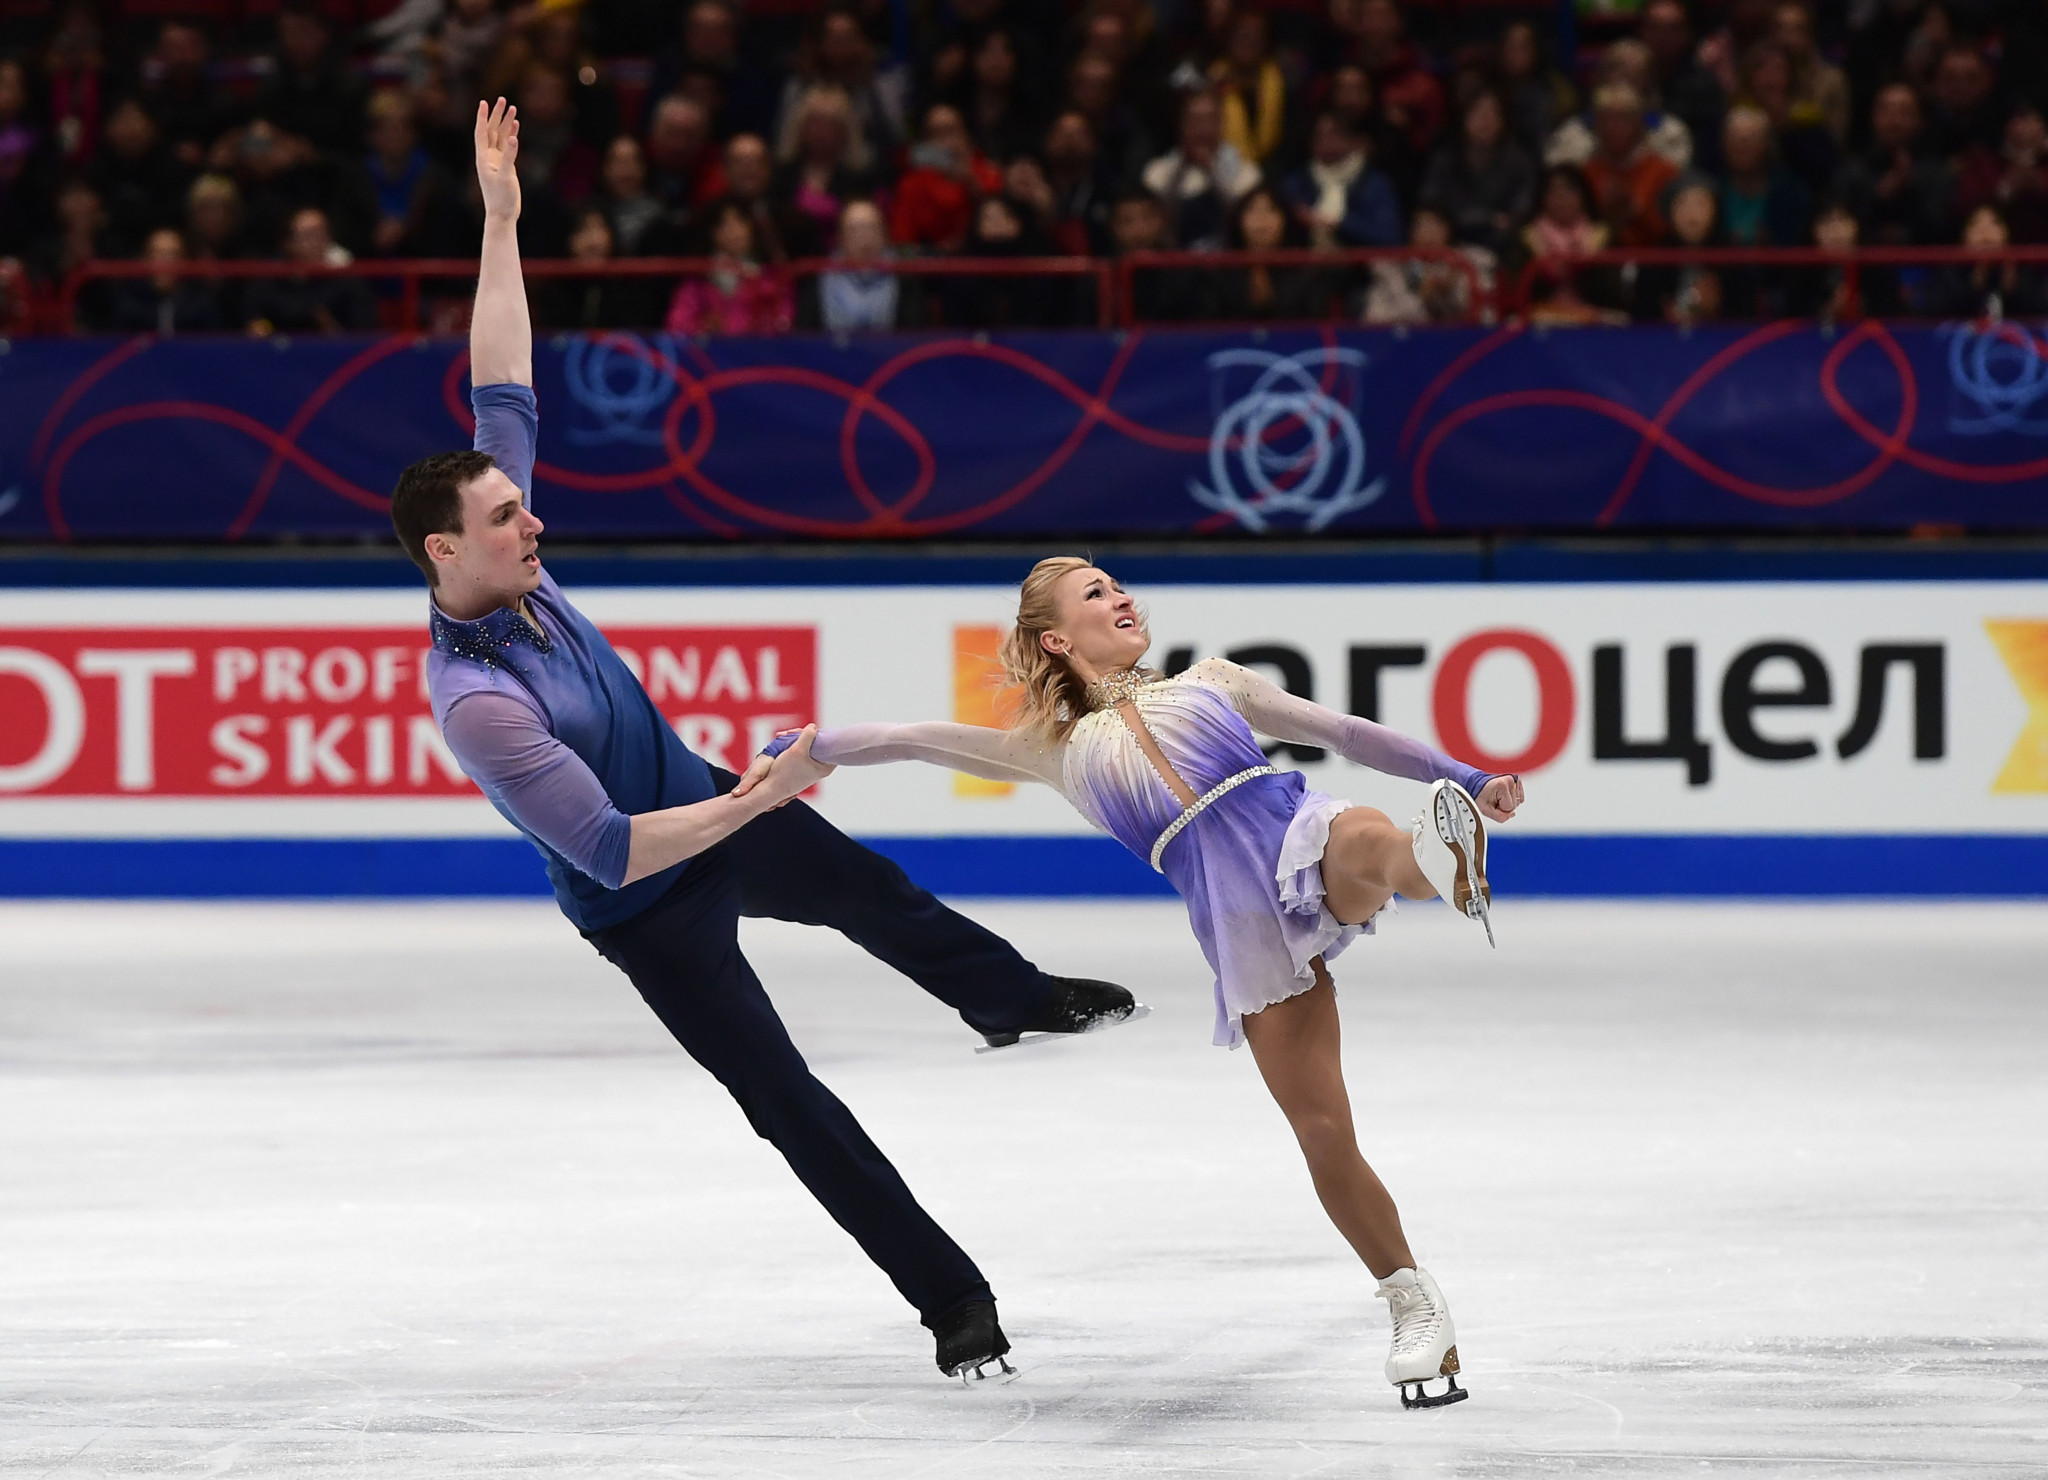 Germany's Aliona Savchenko and Bruno Massott won gold in the pairs event, despite Huang Feng 